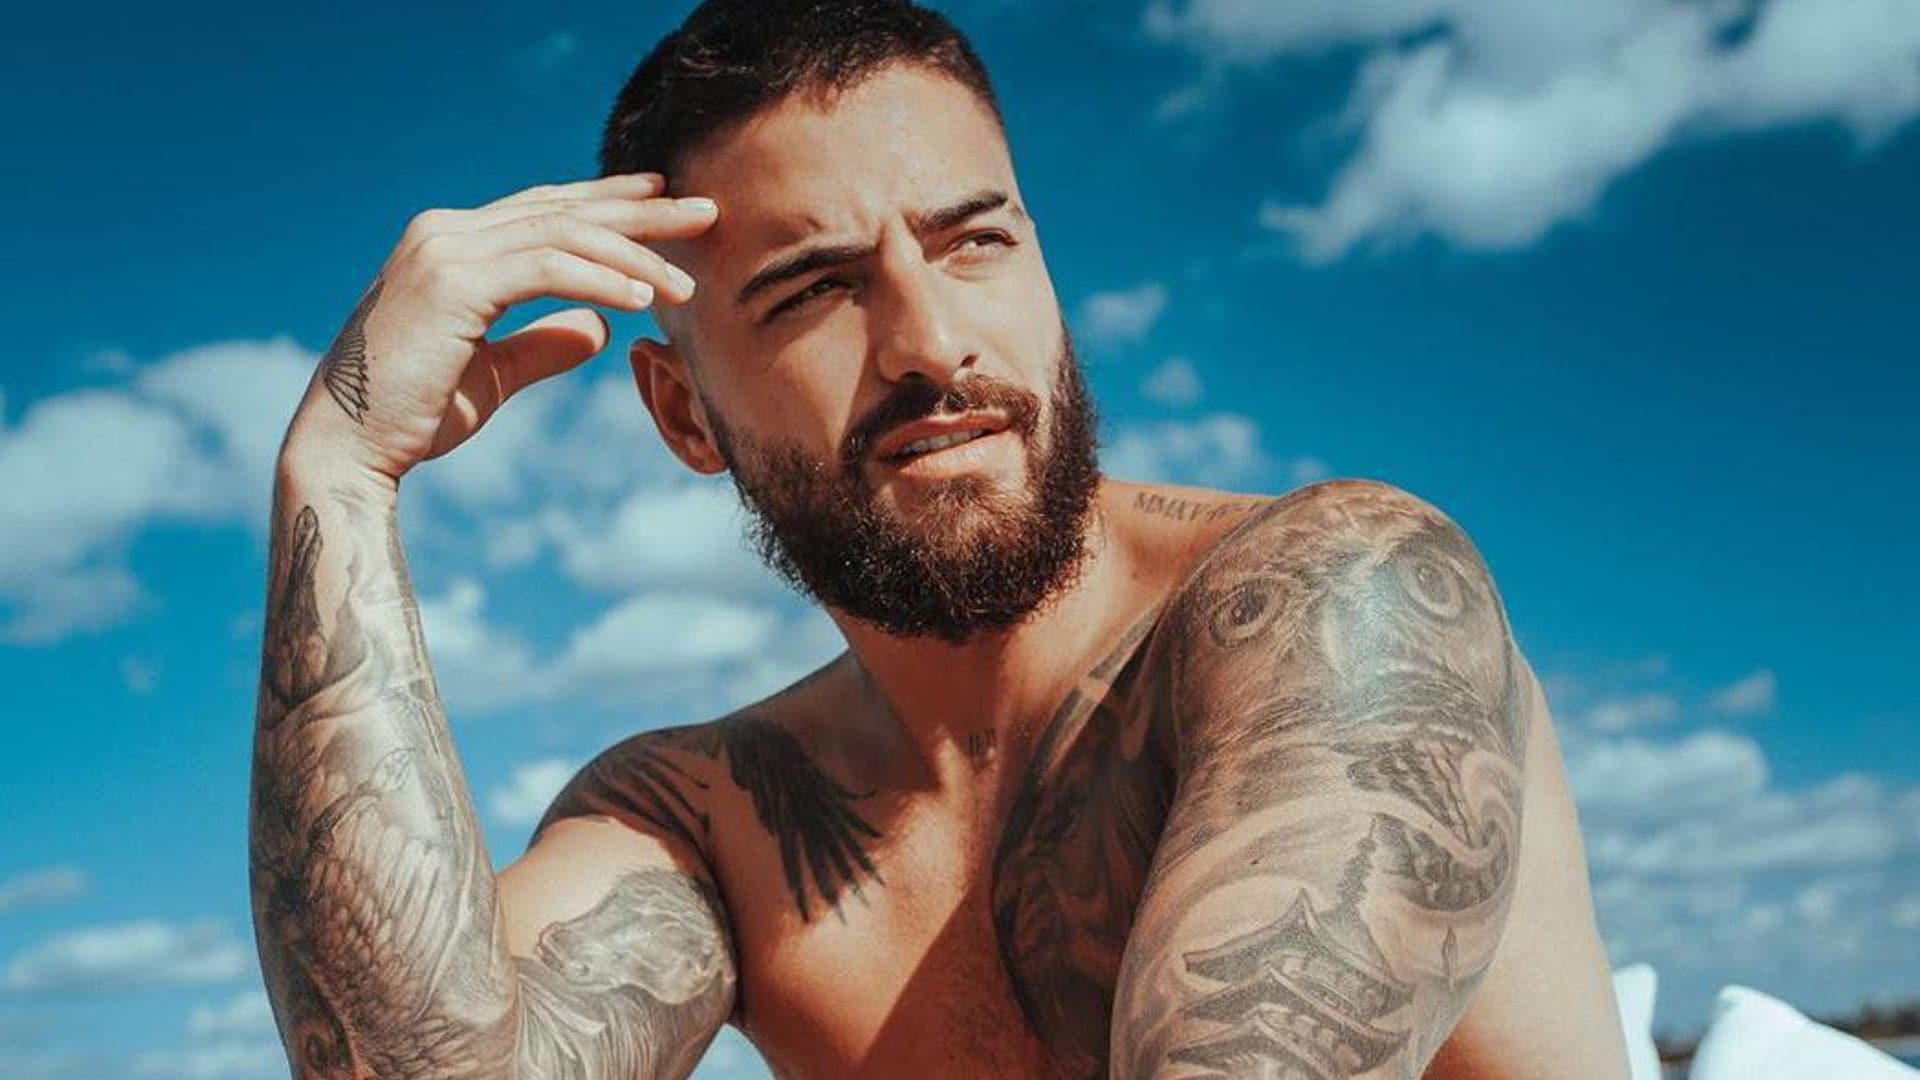 Maluma shows off his abs and makes his debut as an underwear model